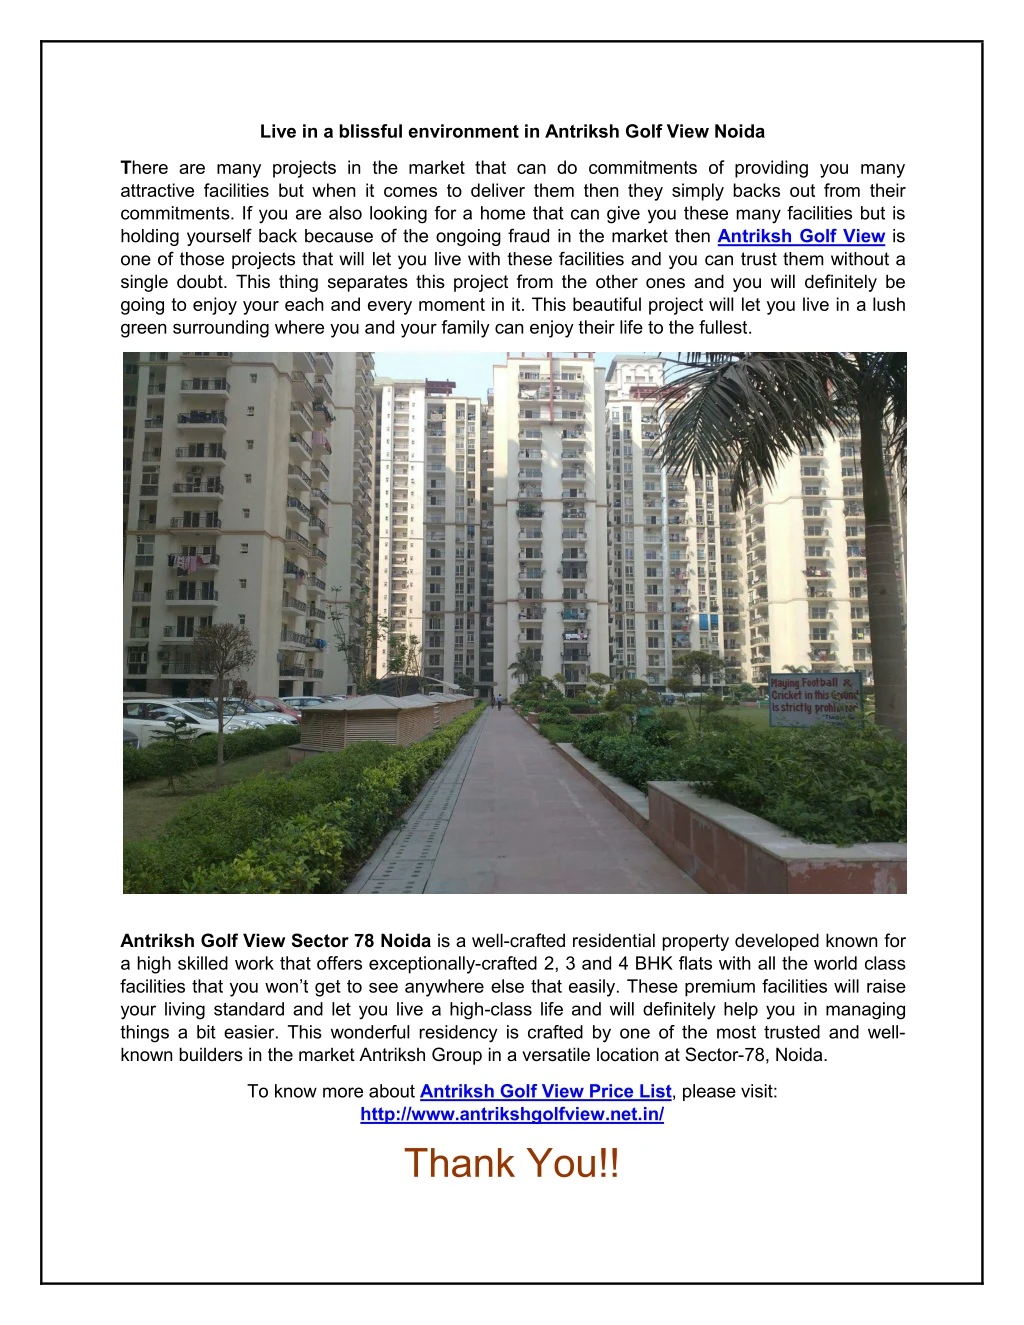 live in a blissful environment in antriksh golf